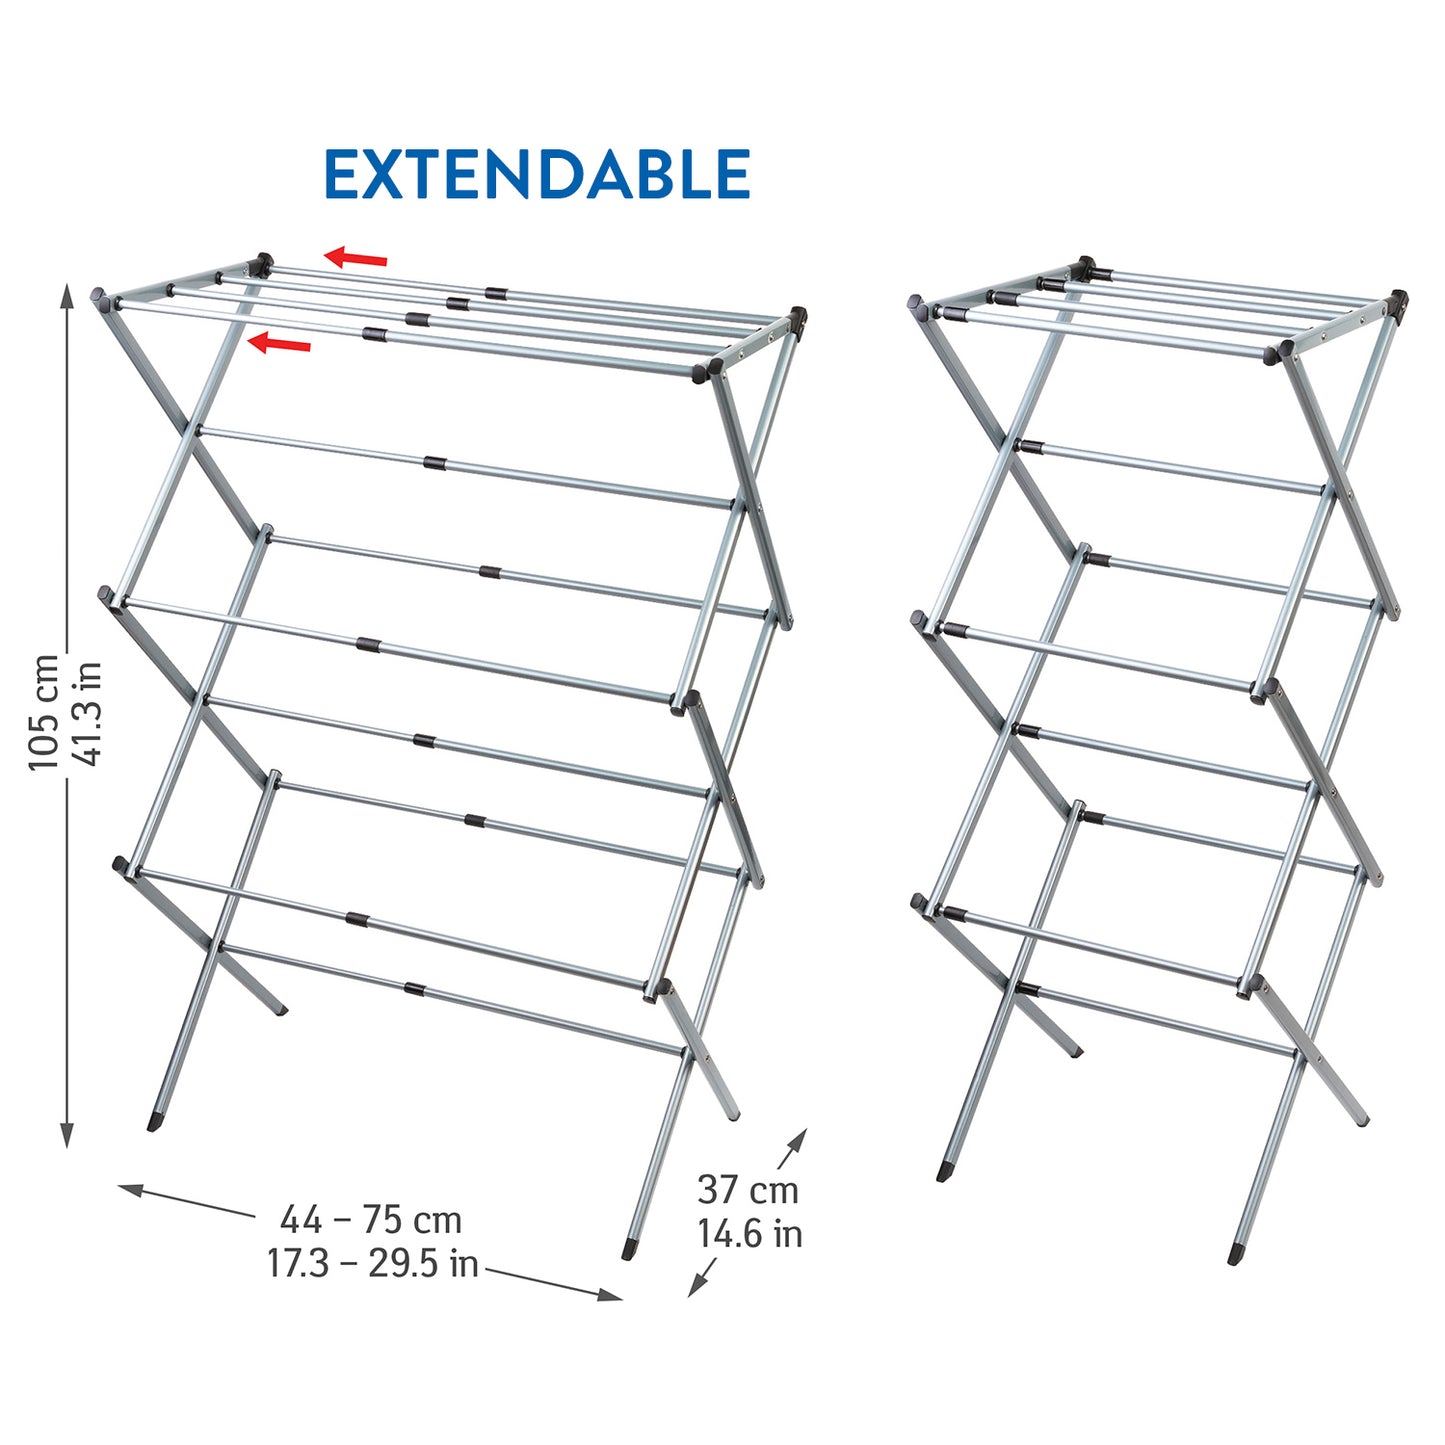 Foldable Drying Laundry Rack, Portable Clothes Horse Made of Rustproof Steel, art moon Gobi, 2